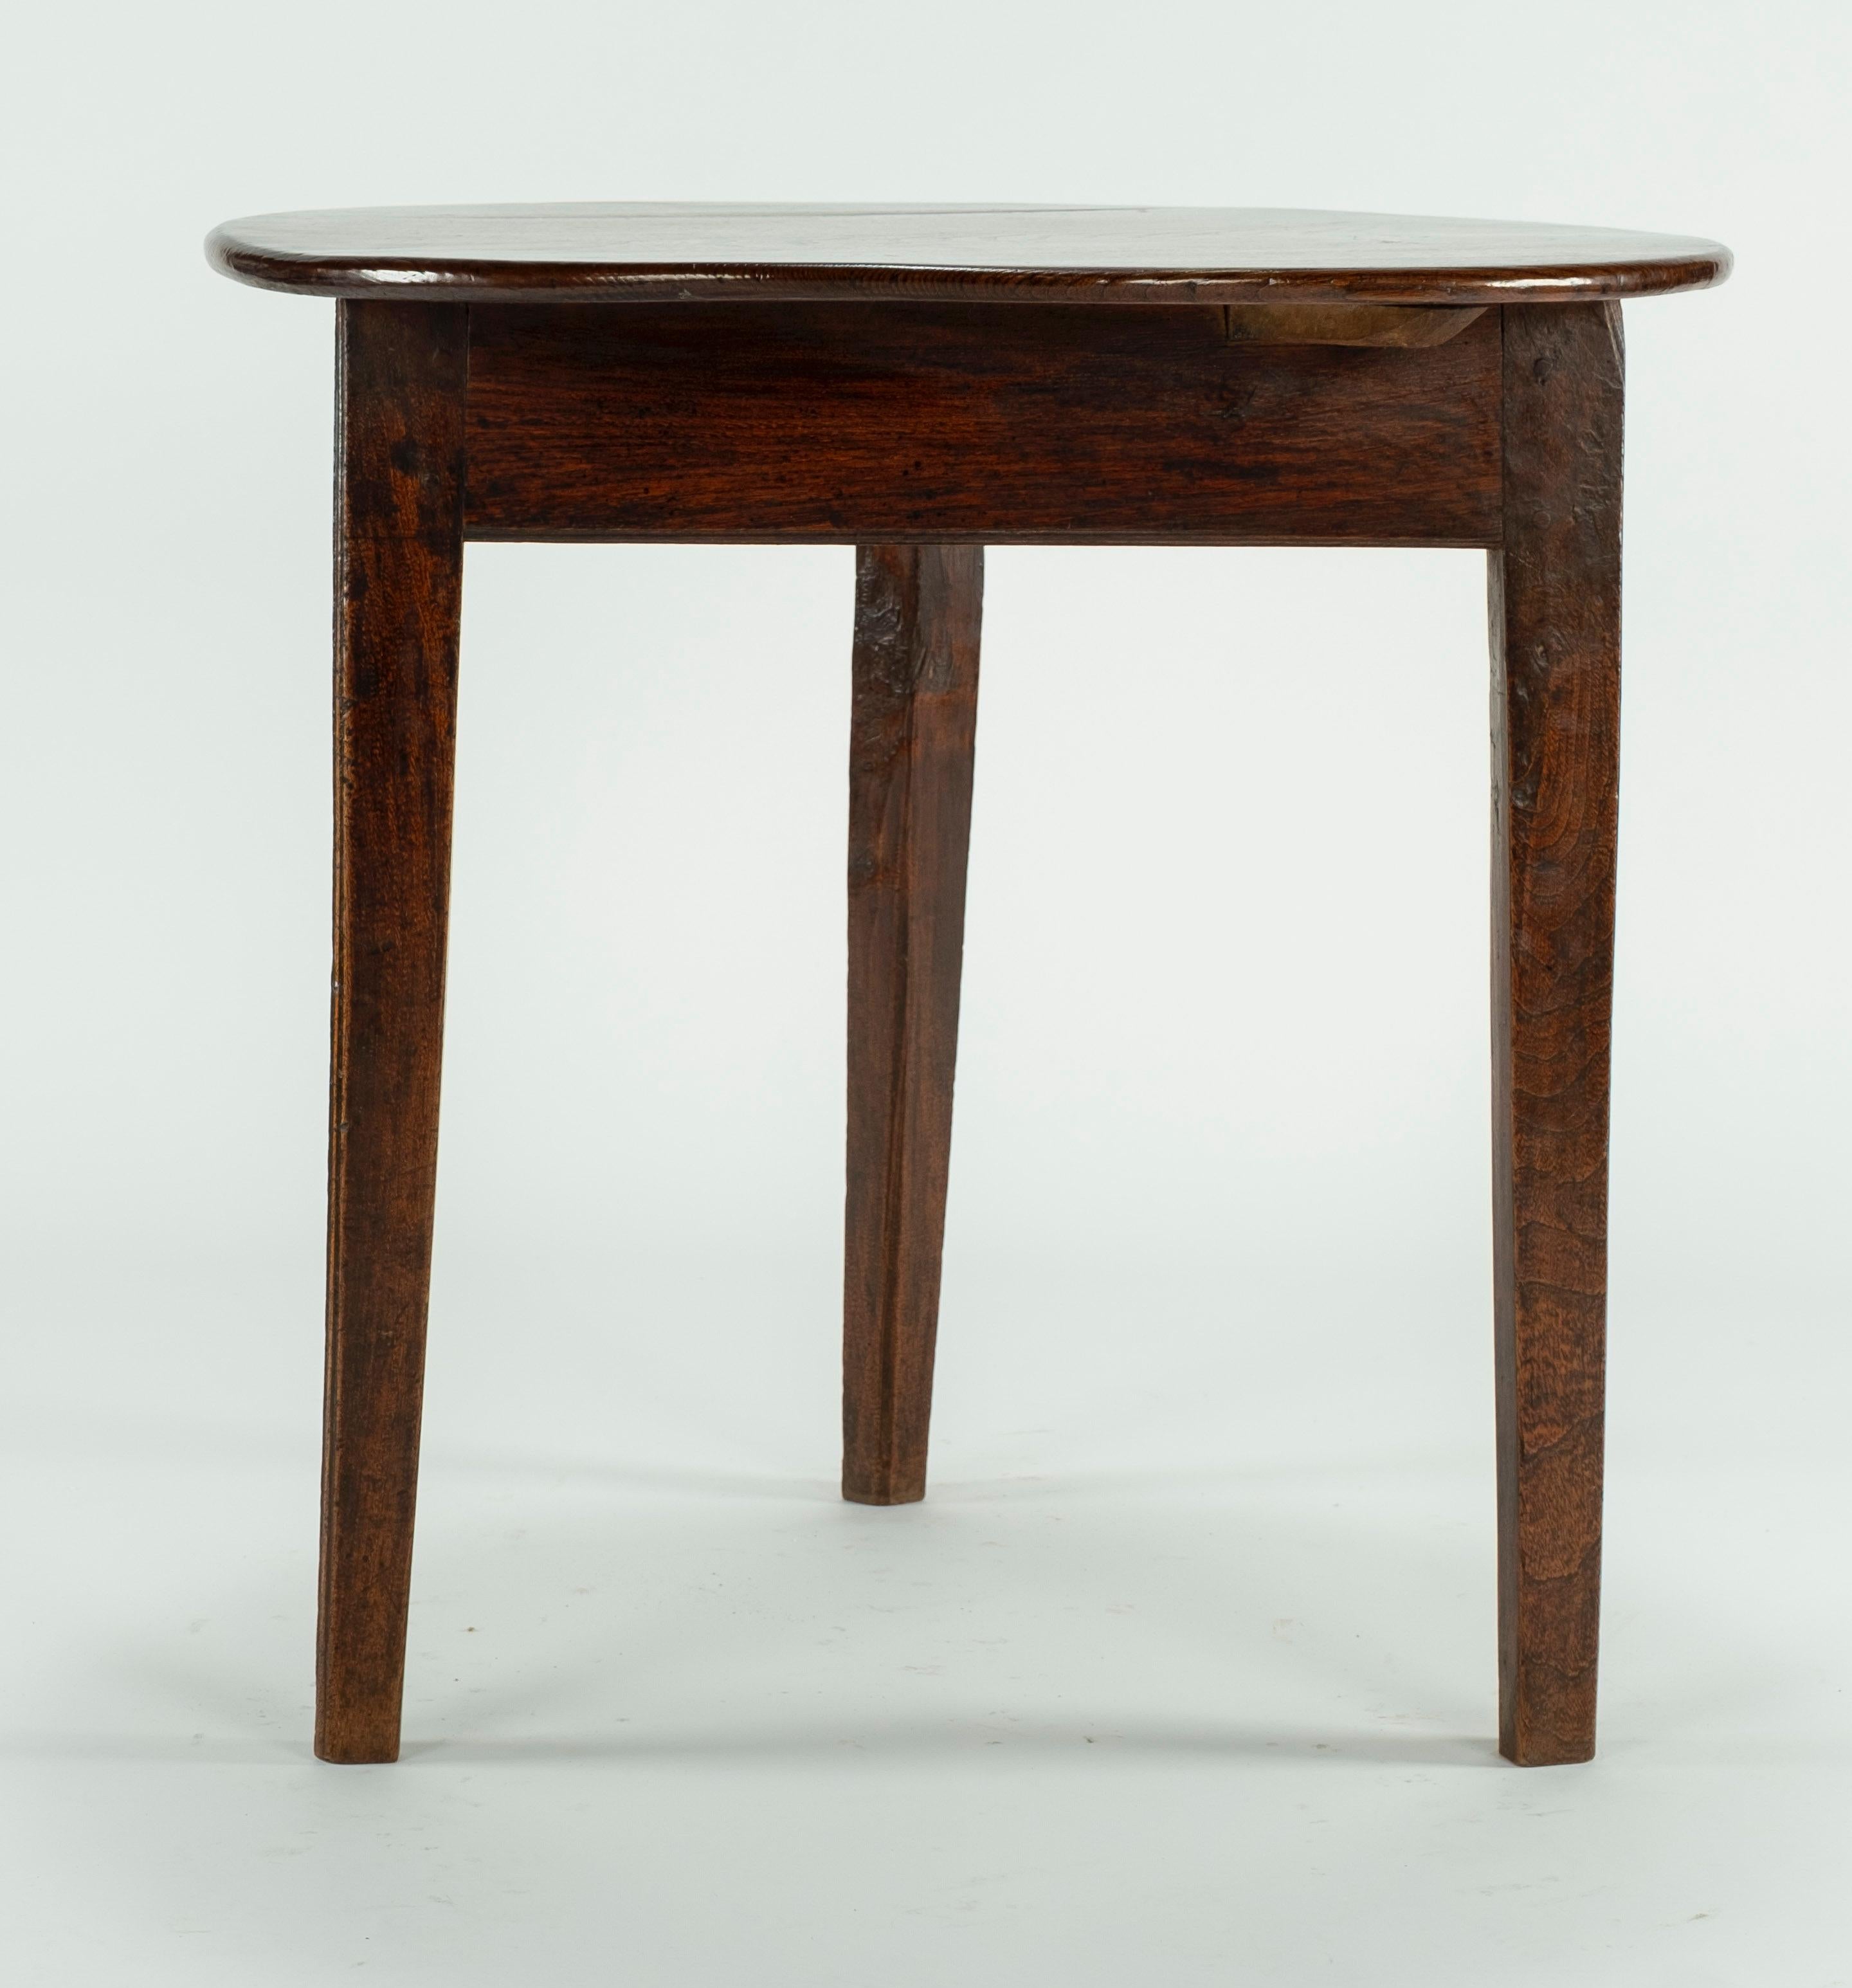 18th century elm cricket table with a flat apron and chamfered straight legs.